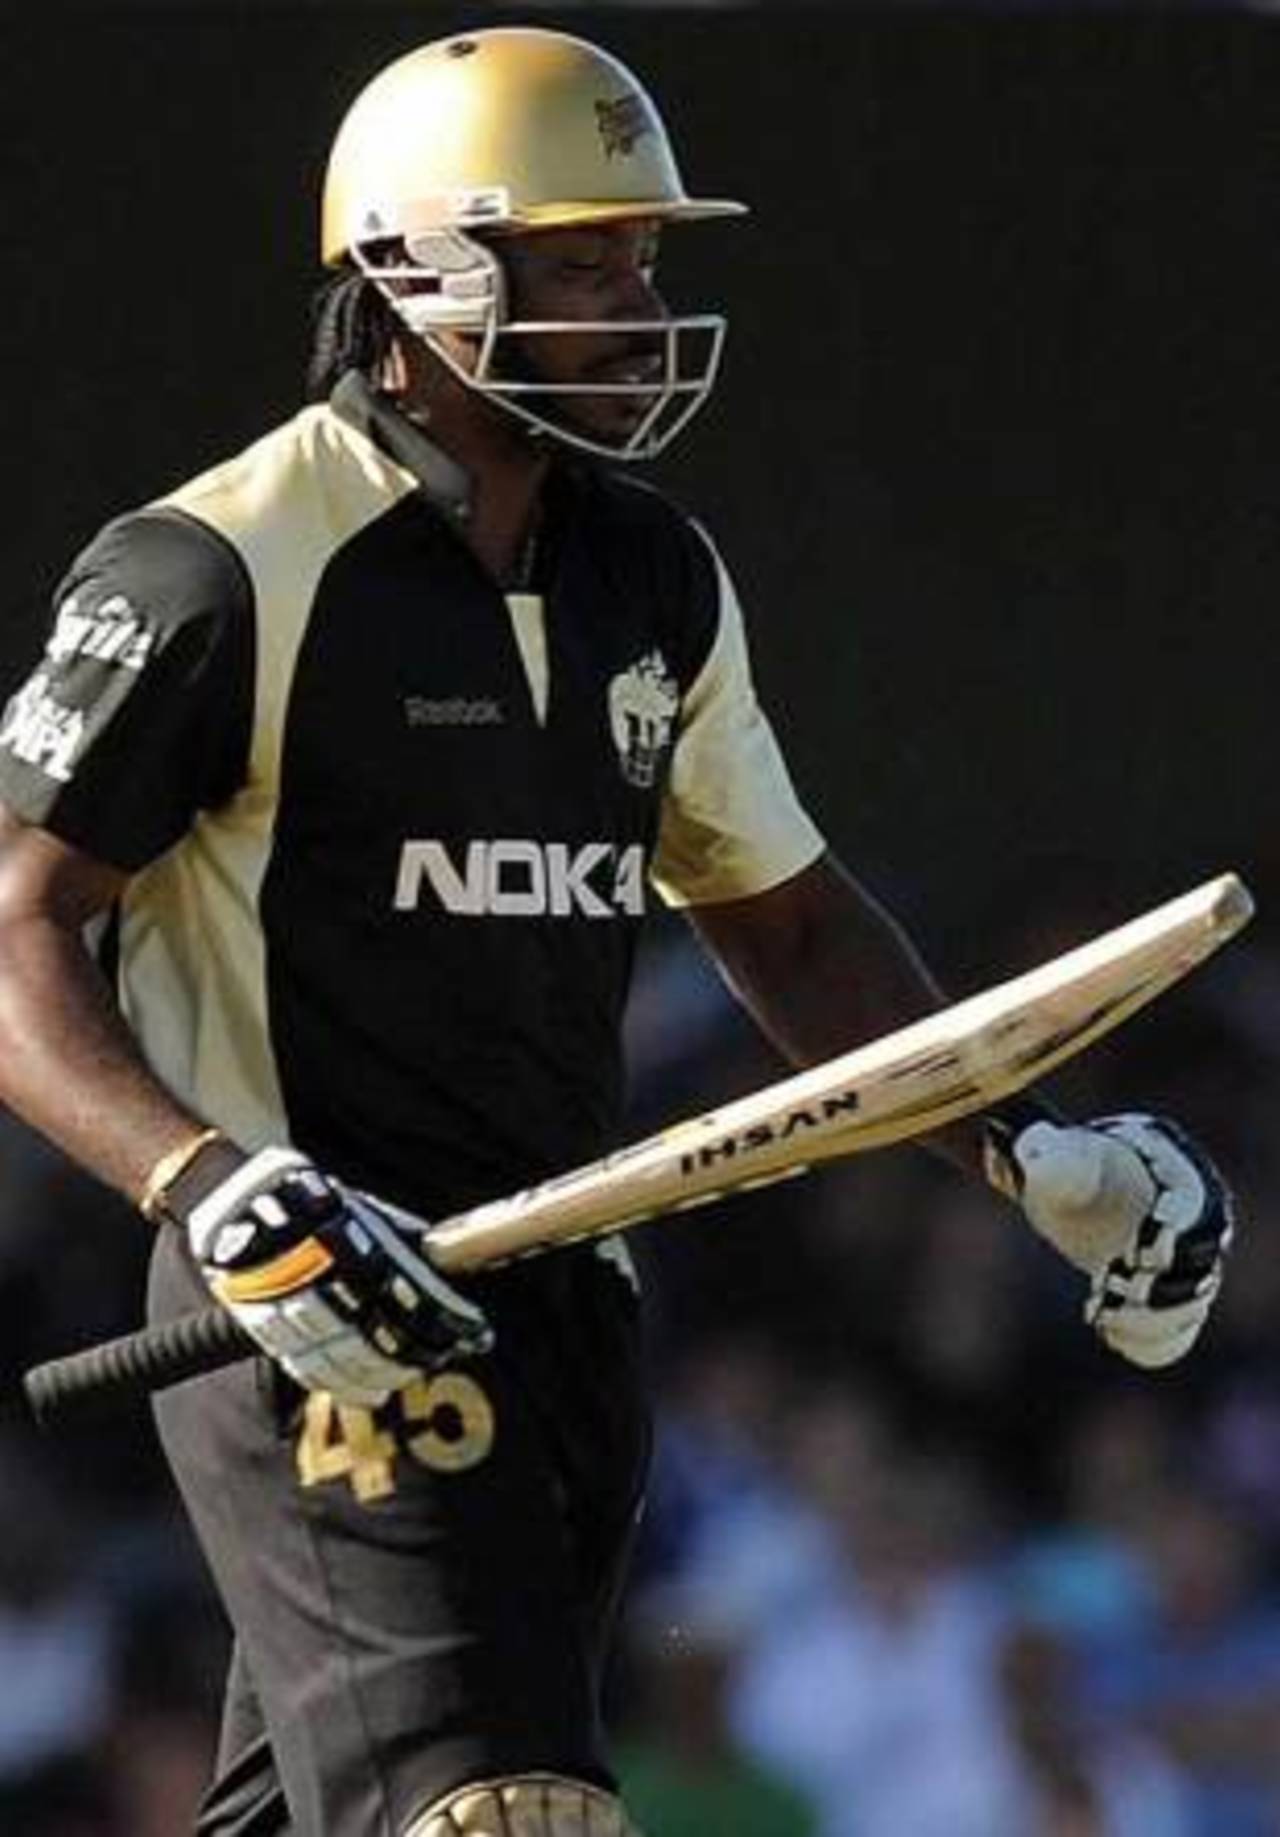 With a top score of 44 not out in the IPL, Chris Gayle needs to set the record straight&nbsp;&nbsp;&bull;&nbsp;&nbsp;AFP